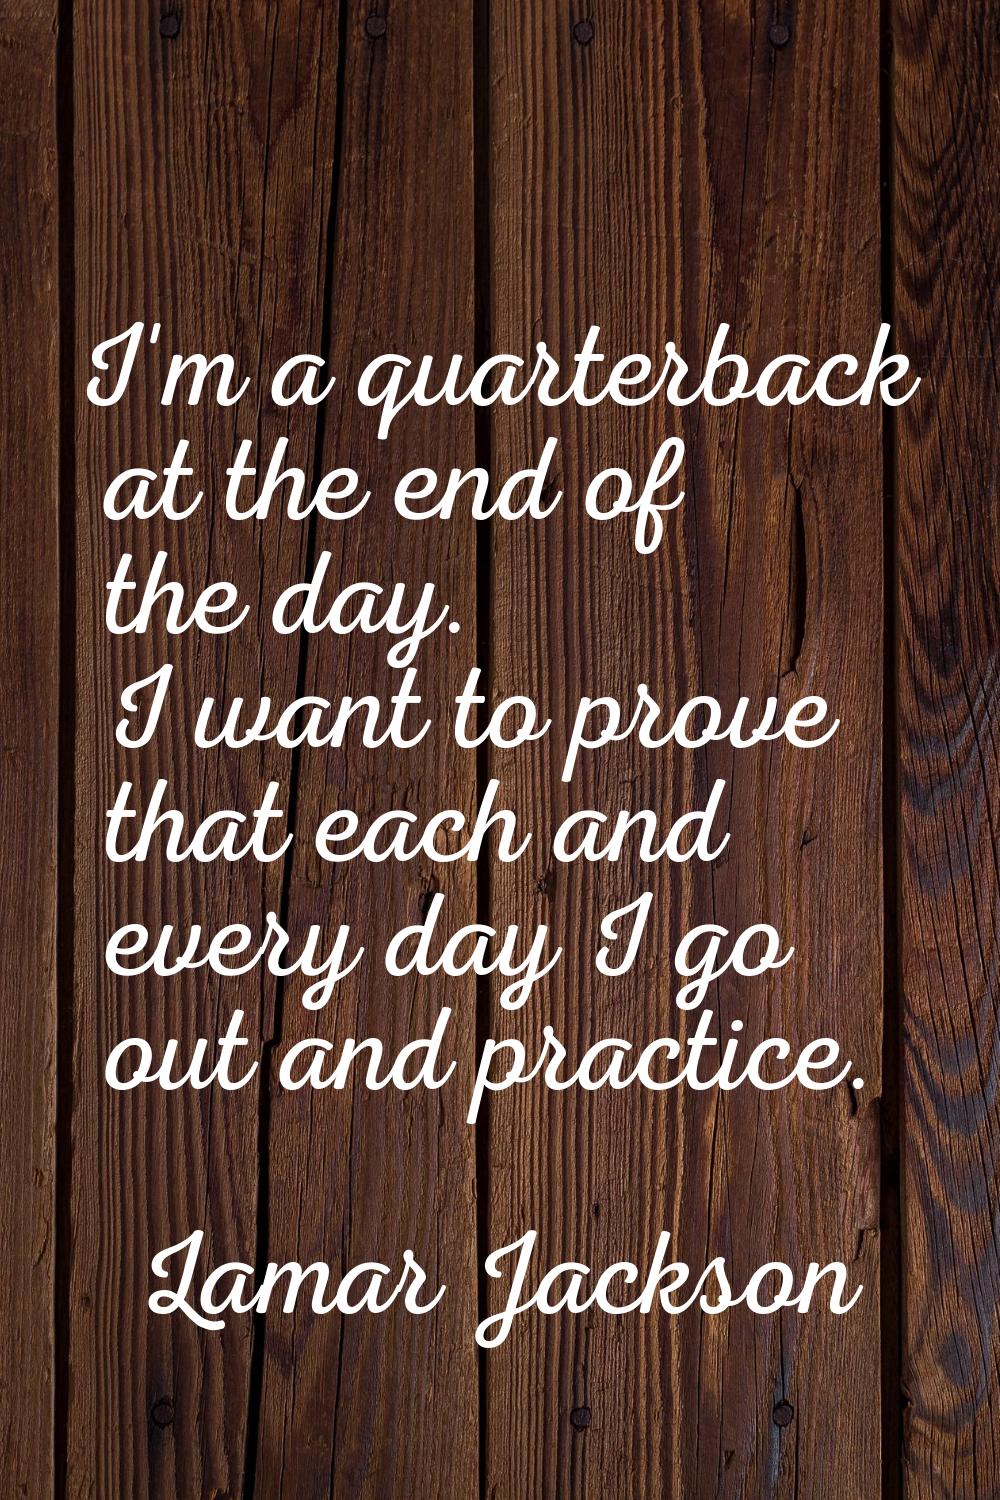 I'm a quarterback at the end of the day. I want to prove that each and every day I go out and pract